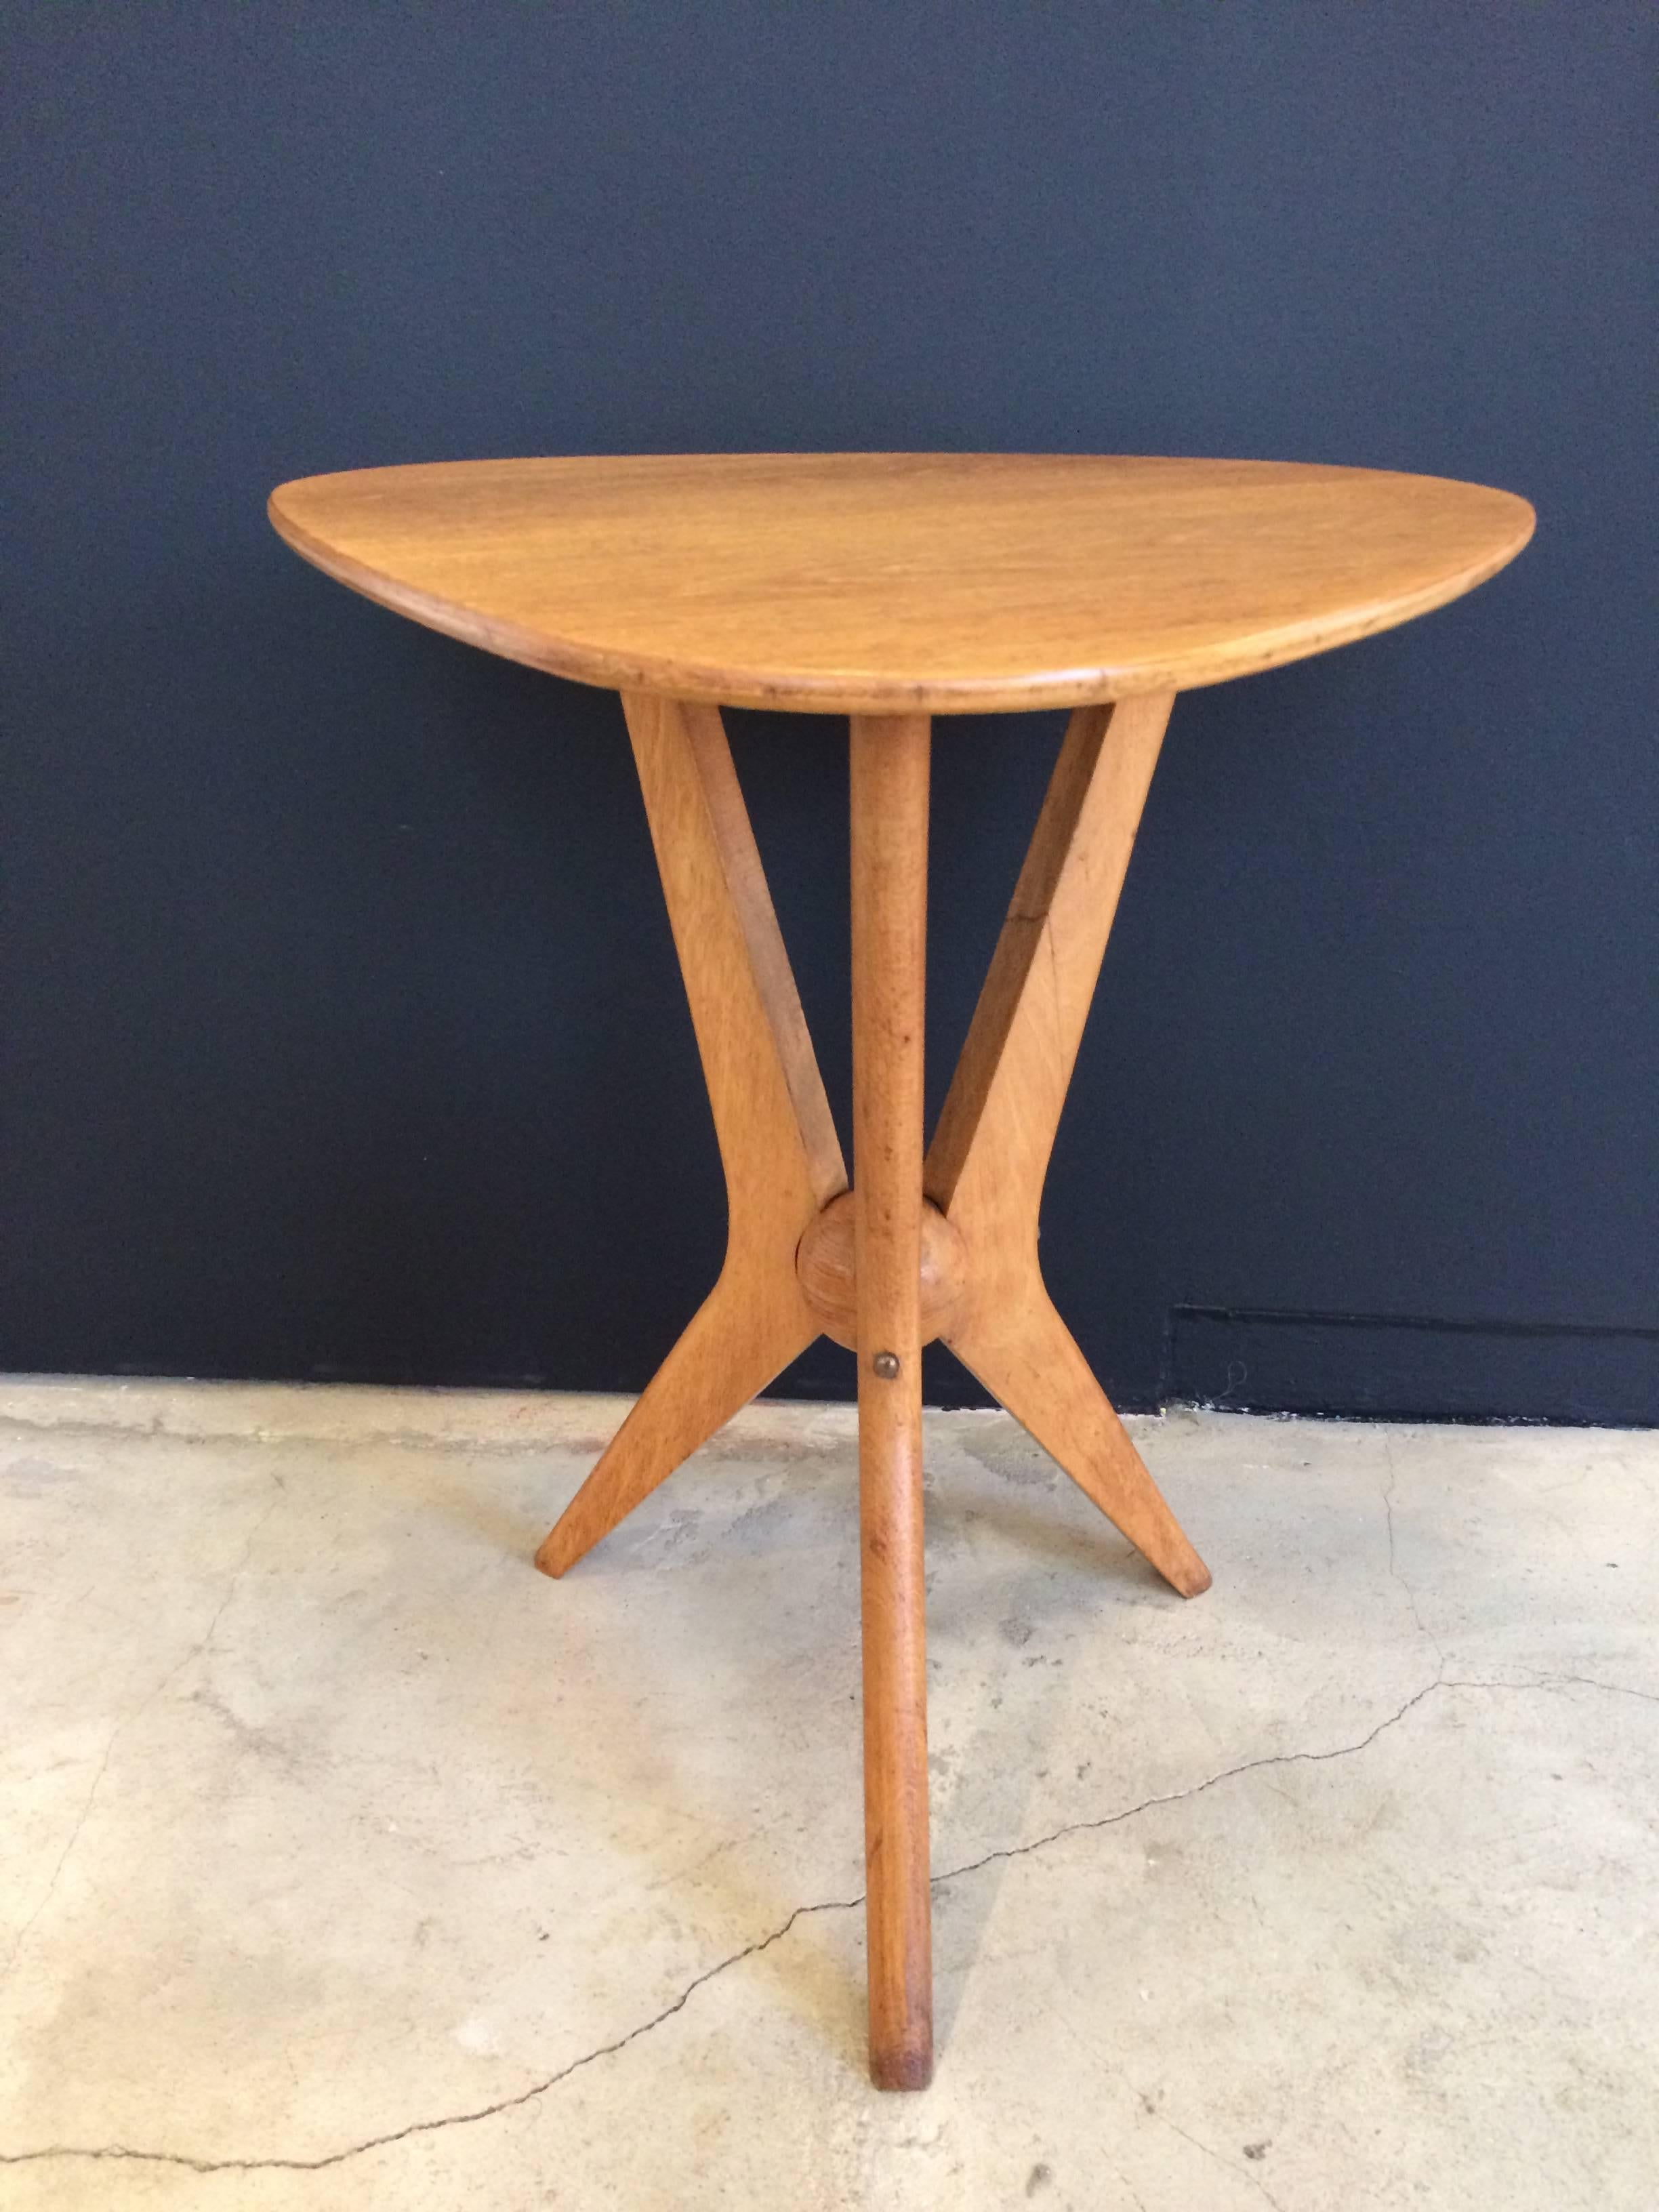 Rare three legs side table, oak triangular top,
dismountable (one of the first French flat packing)
designed and edited in 1950, by René-Jean Caillette.